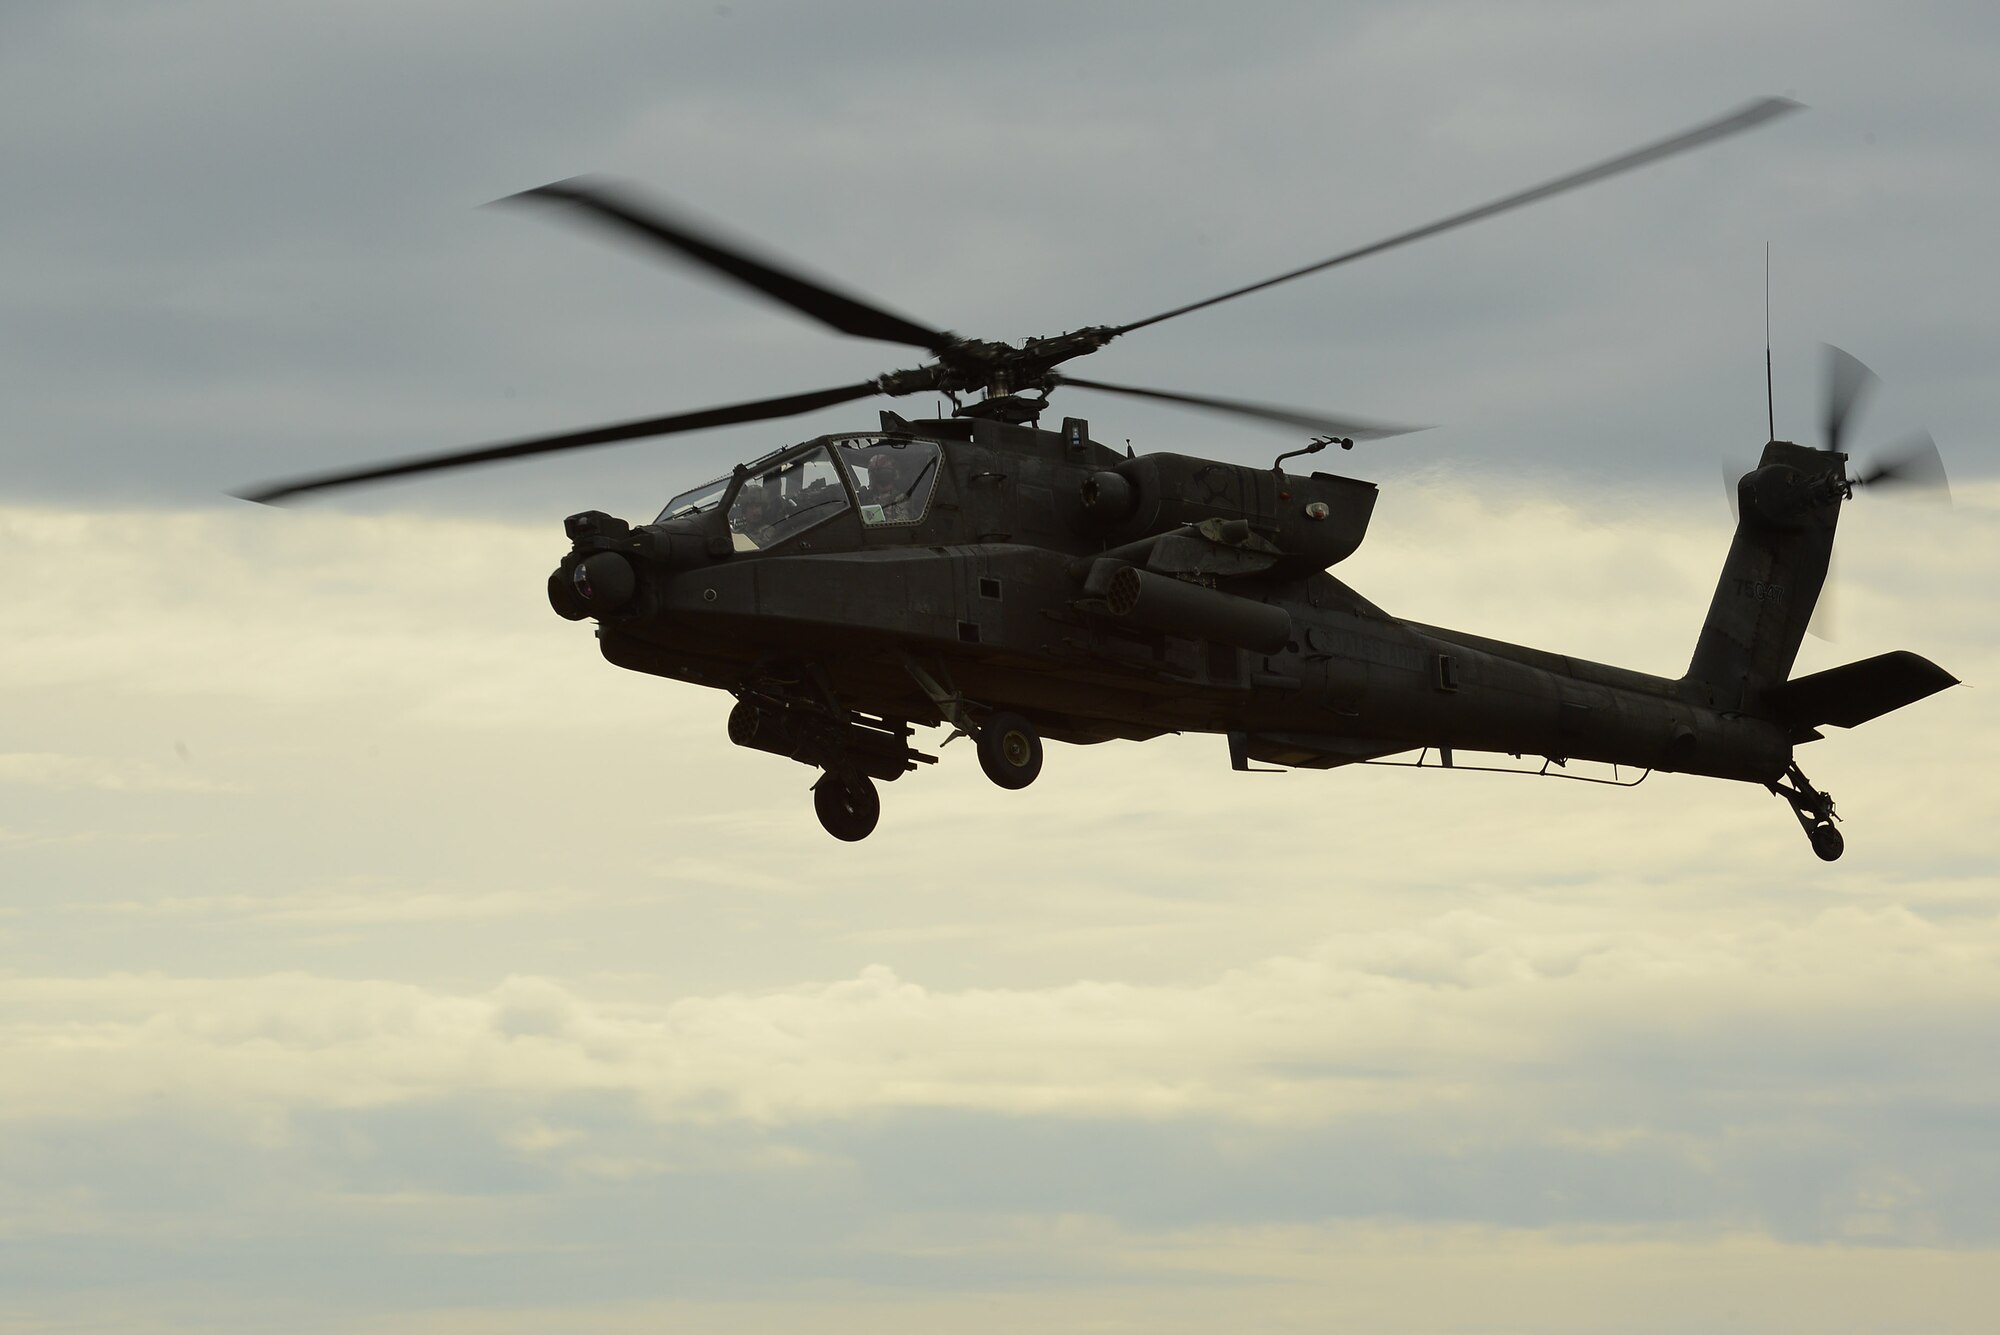 An AH-64 Apache assigned to the 1-130 Attack Recon Battalion, North Carolina Army National Guard, based at the Raleigh-Durham International Airport, trains at Poinsett Electronic Combat Range, Sumter, S.C., Nov. 13, 2014. Poinsett Range is open to the public for viewing the aircraft as they train. (U.S. Air Force photo by Airman 1st Class Diana M. Cossaboom/Released) 